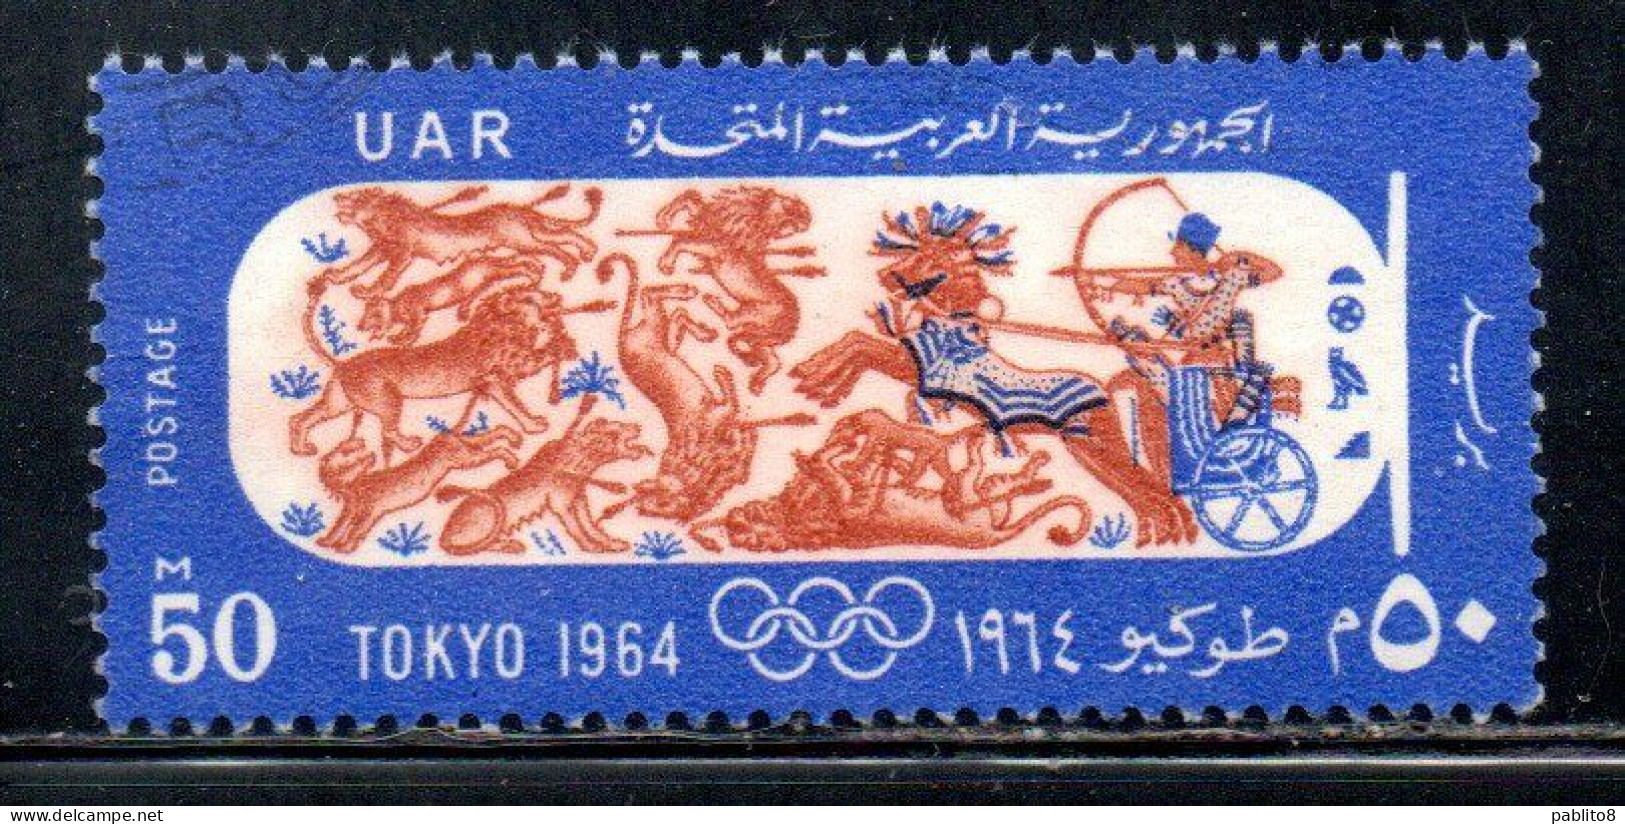 UAR EGYPT EGITTO 1964 OLYMIC GAMES TOKYO PHARAOH IN CHARIOT HUNTING 50m MH - Unused Stamps